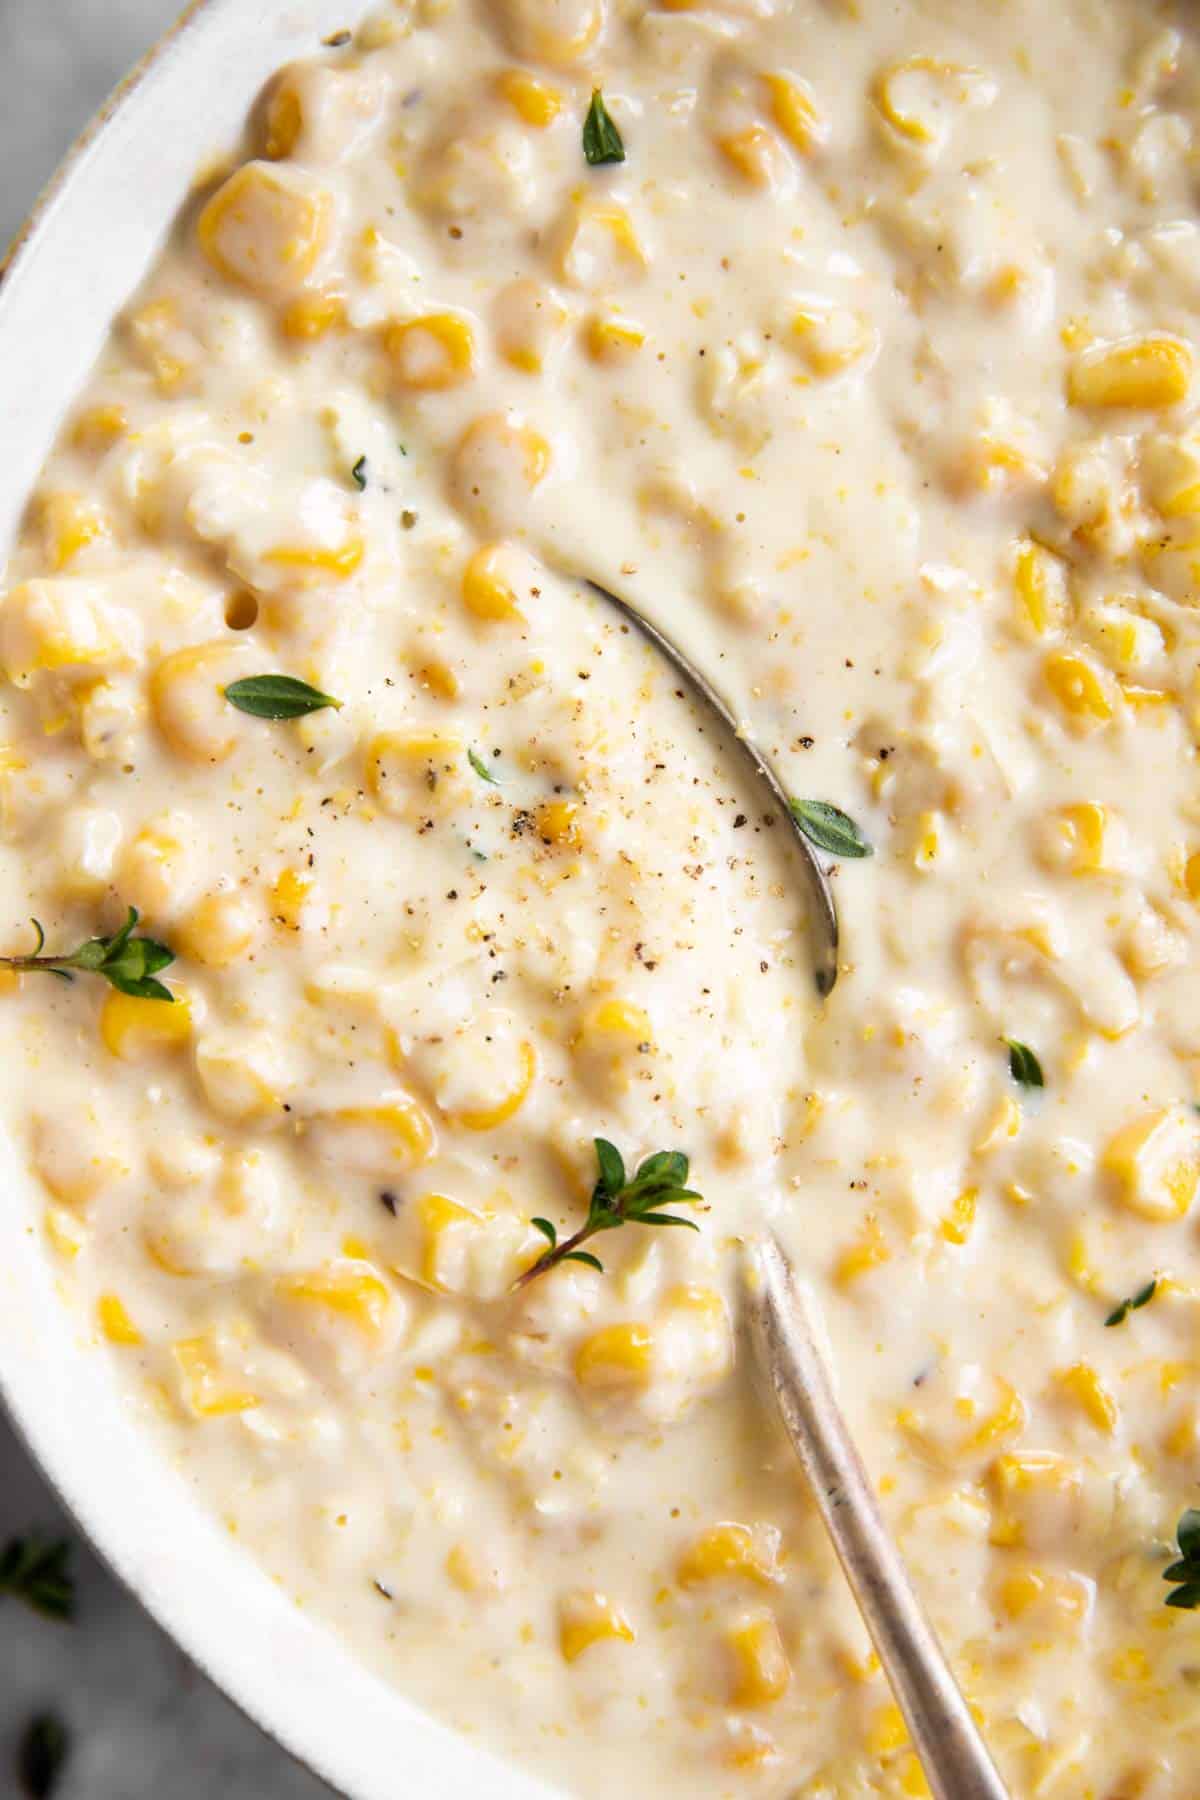 spoon in bowl of creamed corn